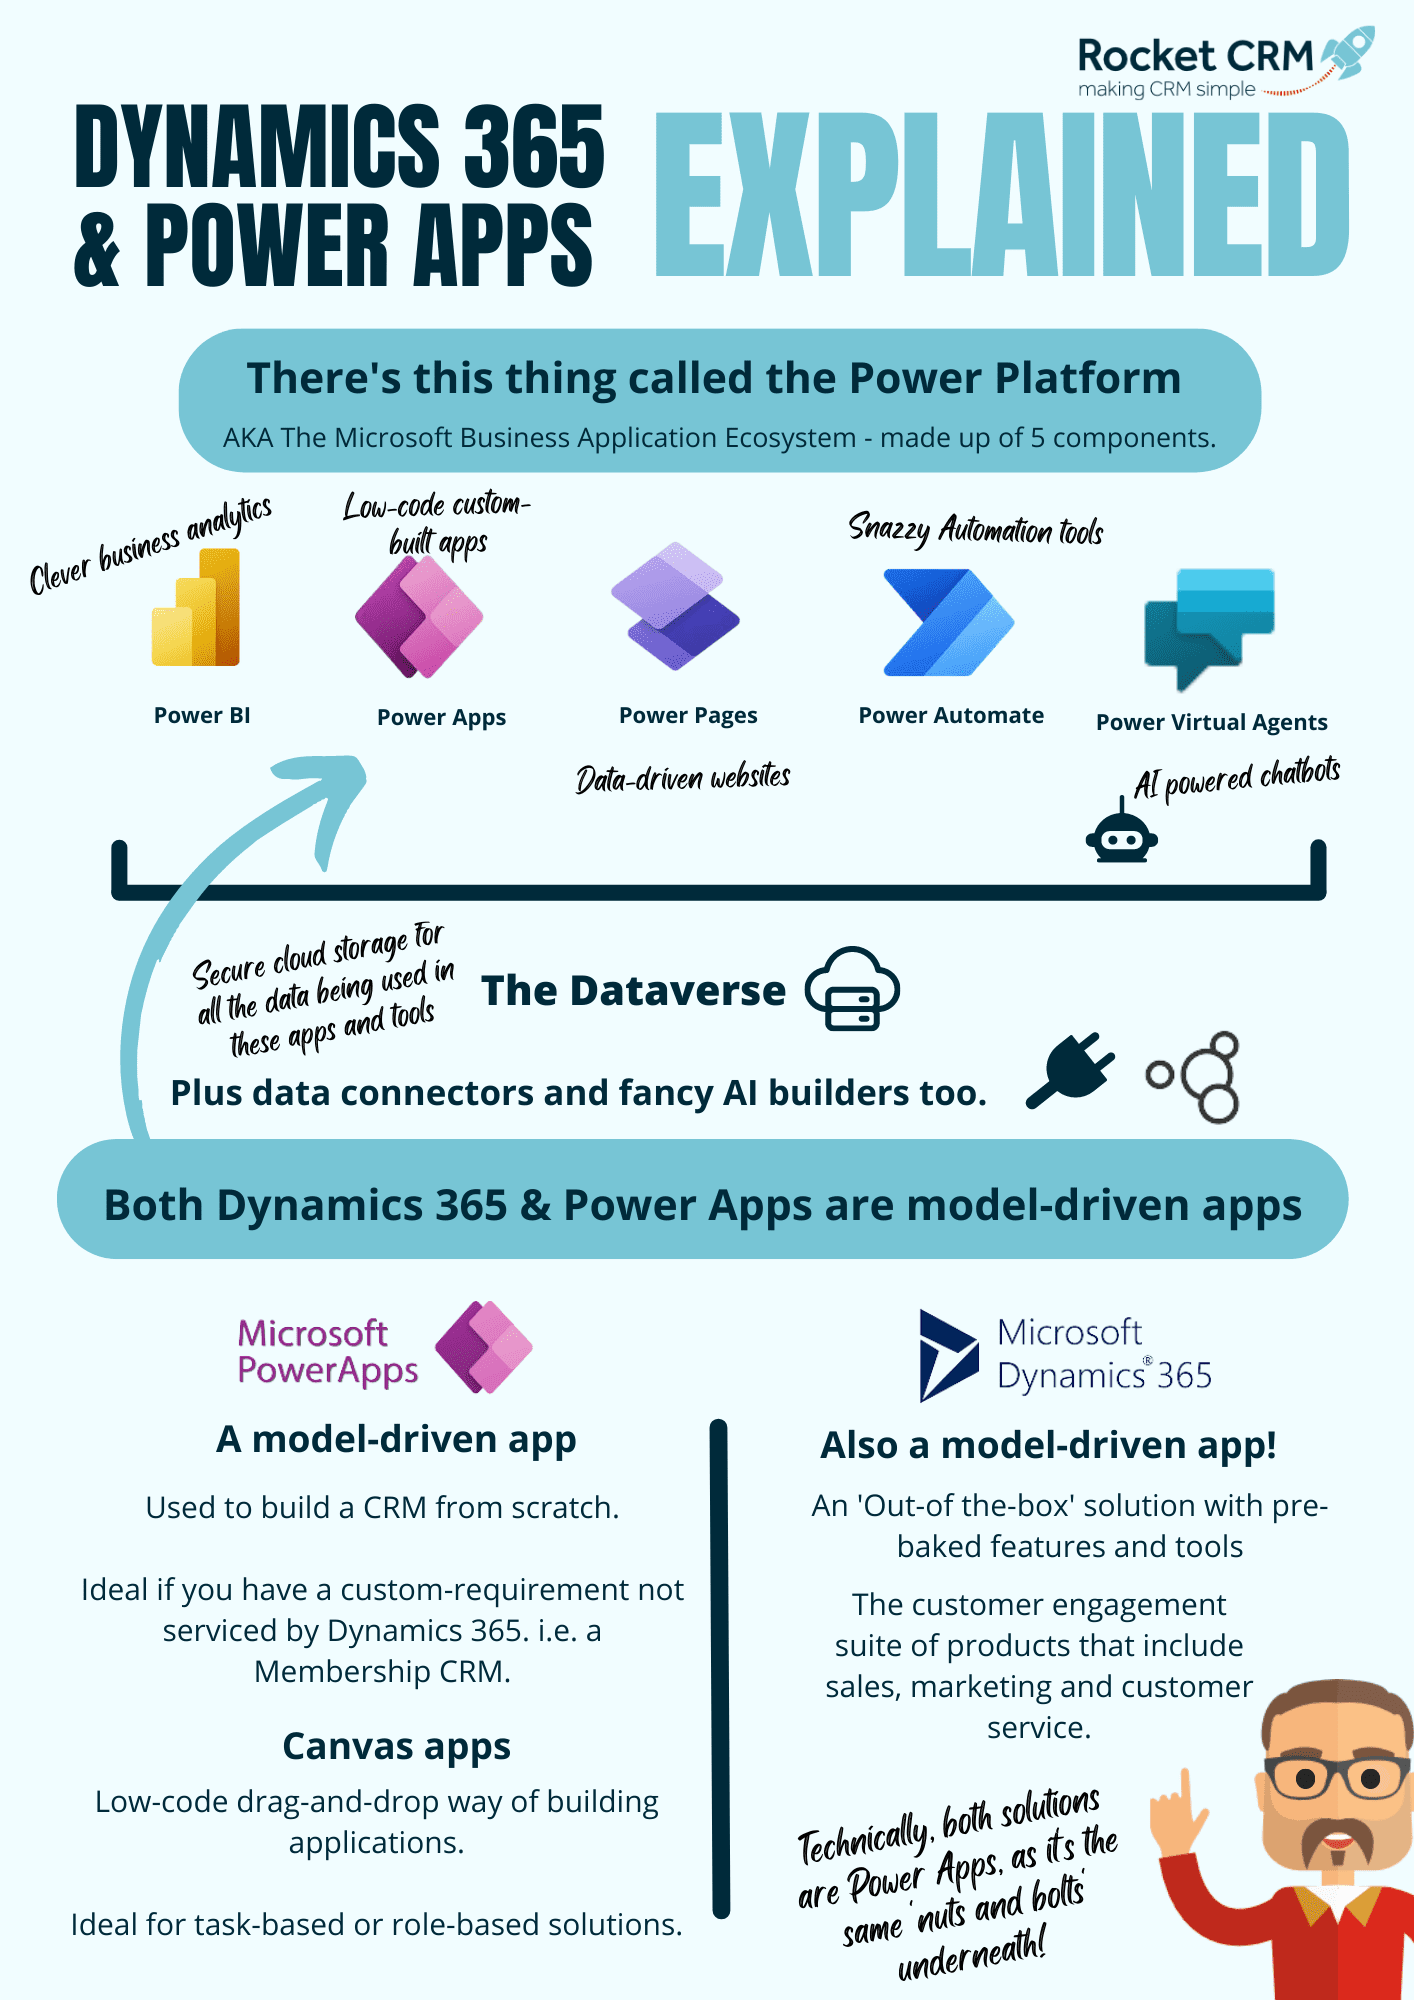 Dynamics 365 and Power Apps explained infographic showing both products in relation to the Power Platform frojm Microsoft.